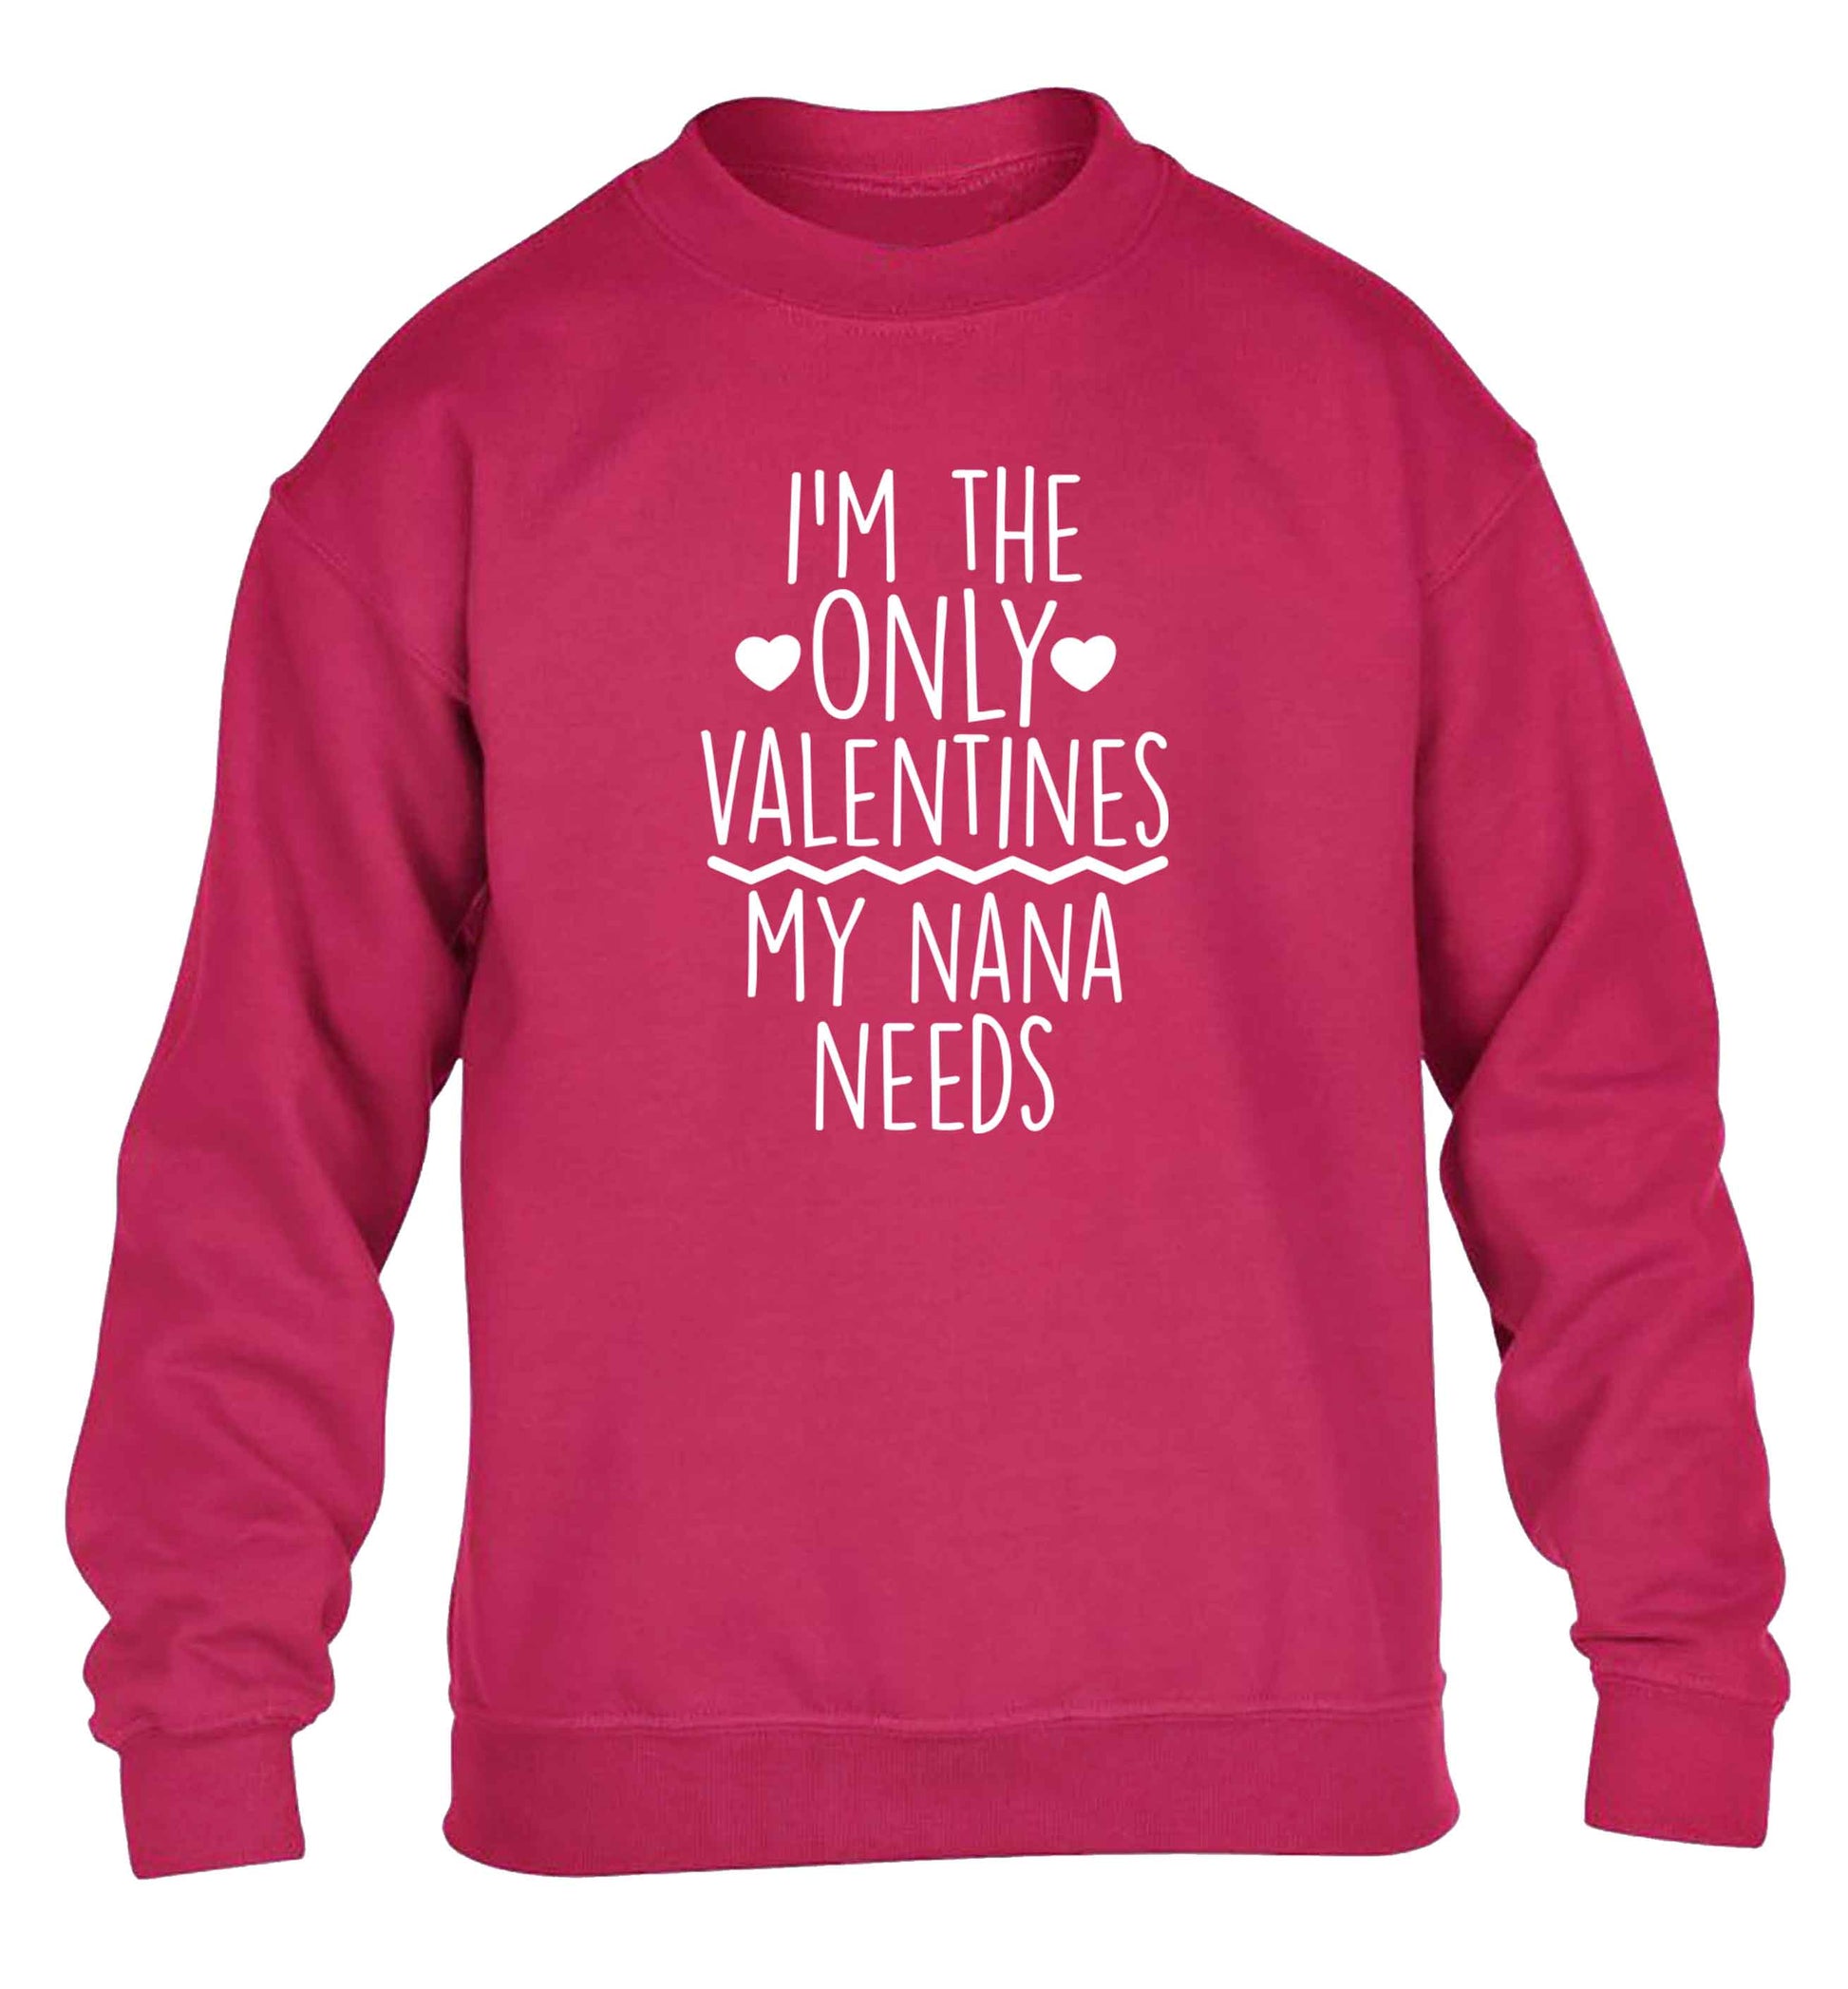 I'm the only valentines my nana needs children's pink sweater 12-13 Years